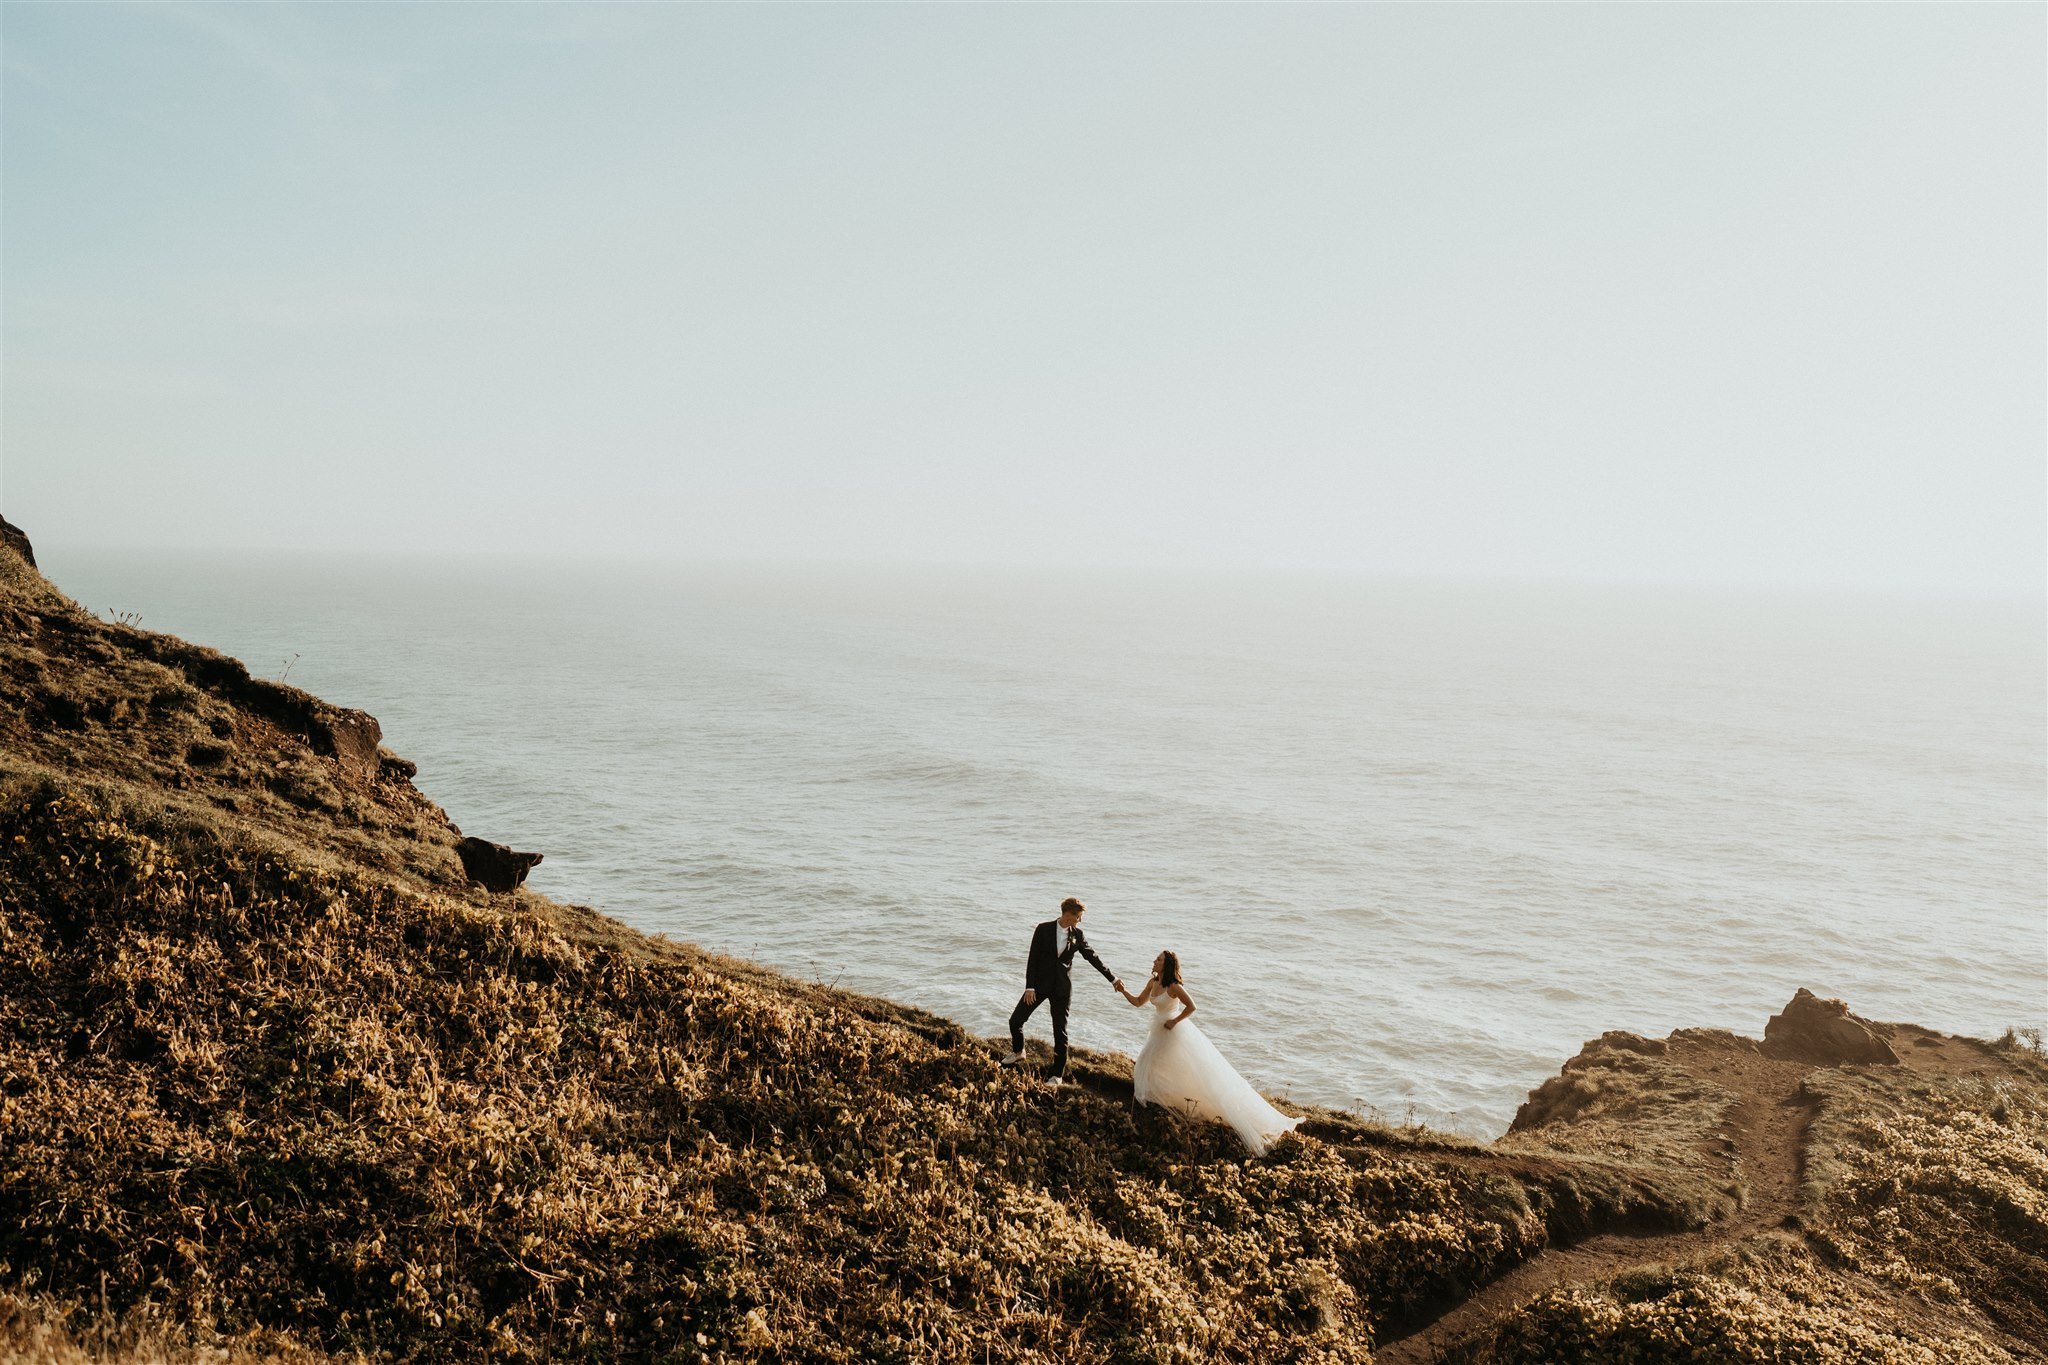 Two brides walking hand in hand for their elopement on the Oregon cliffs